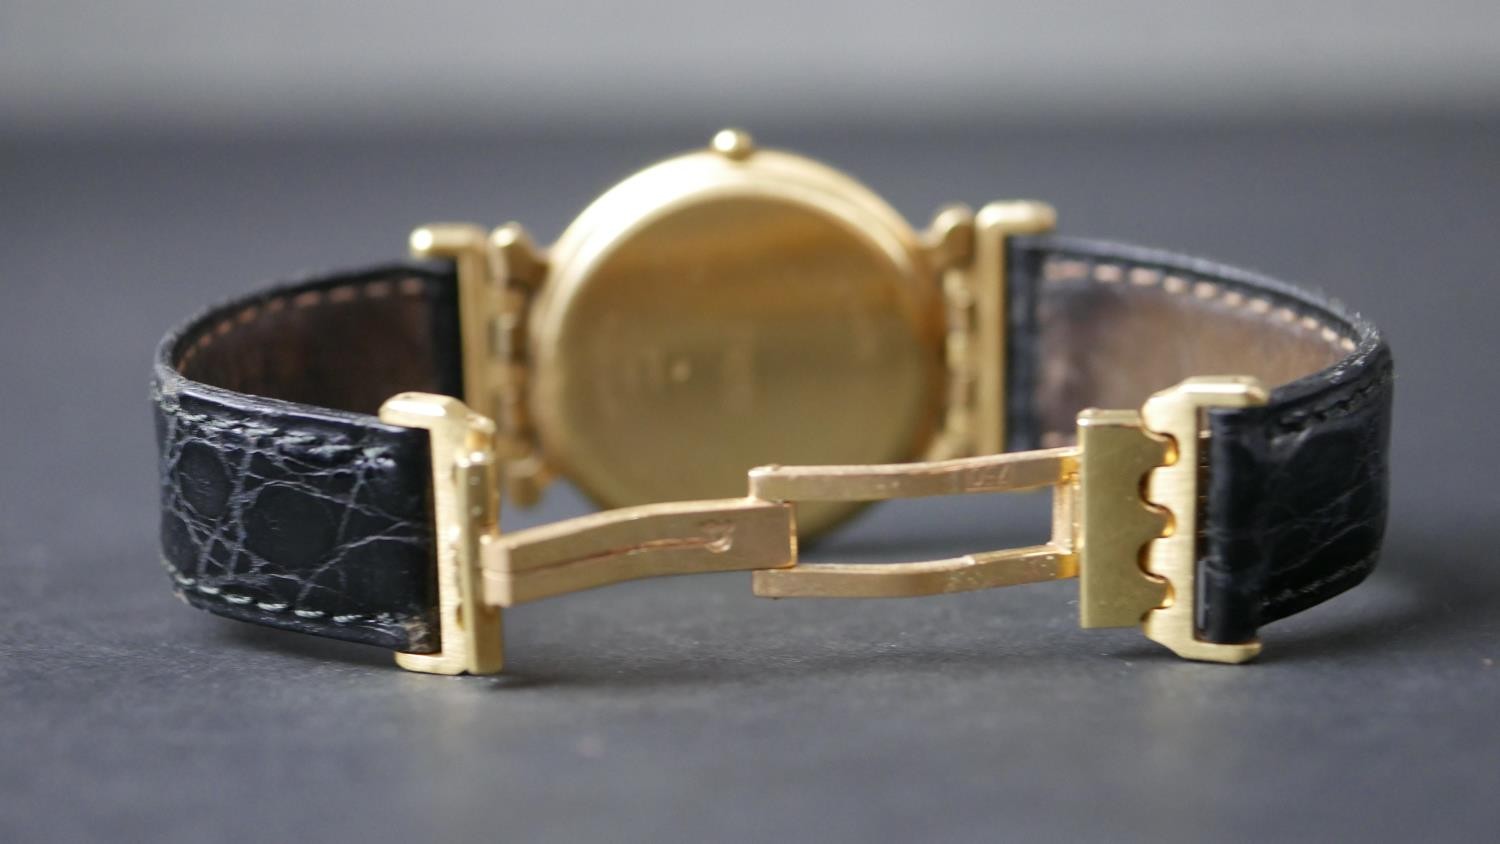 An 18 carat yellow gold ‘Tigresse’ watch, by Fred. Date and days of week aperture with leather - Image 5 of 8